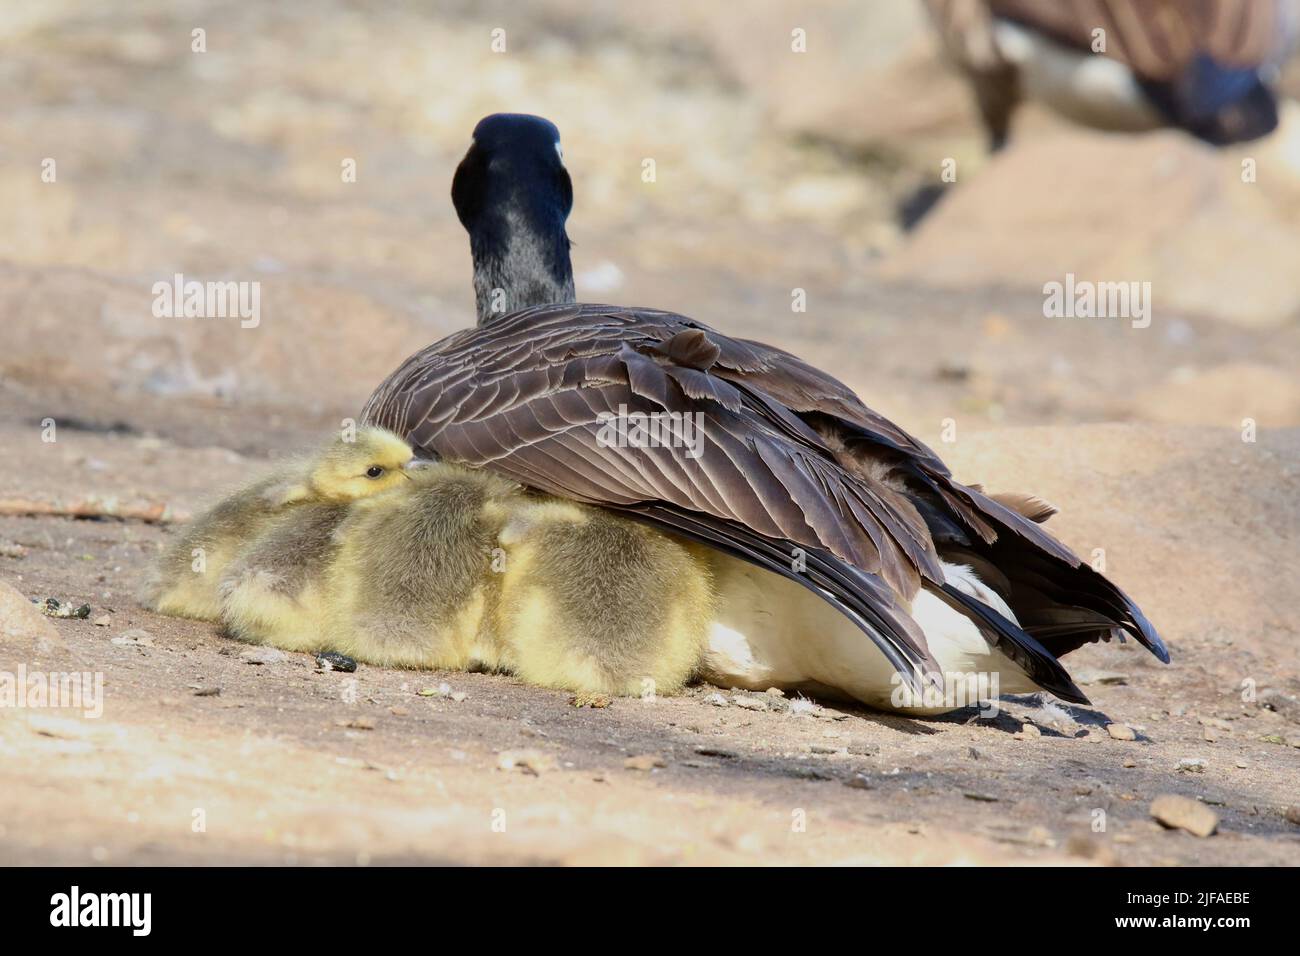 Canada goose Branta canadensis sheltering her family of goslings under her wing as they rest and stay warm Stock Photo